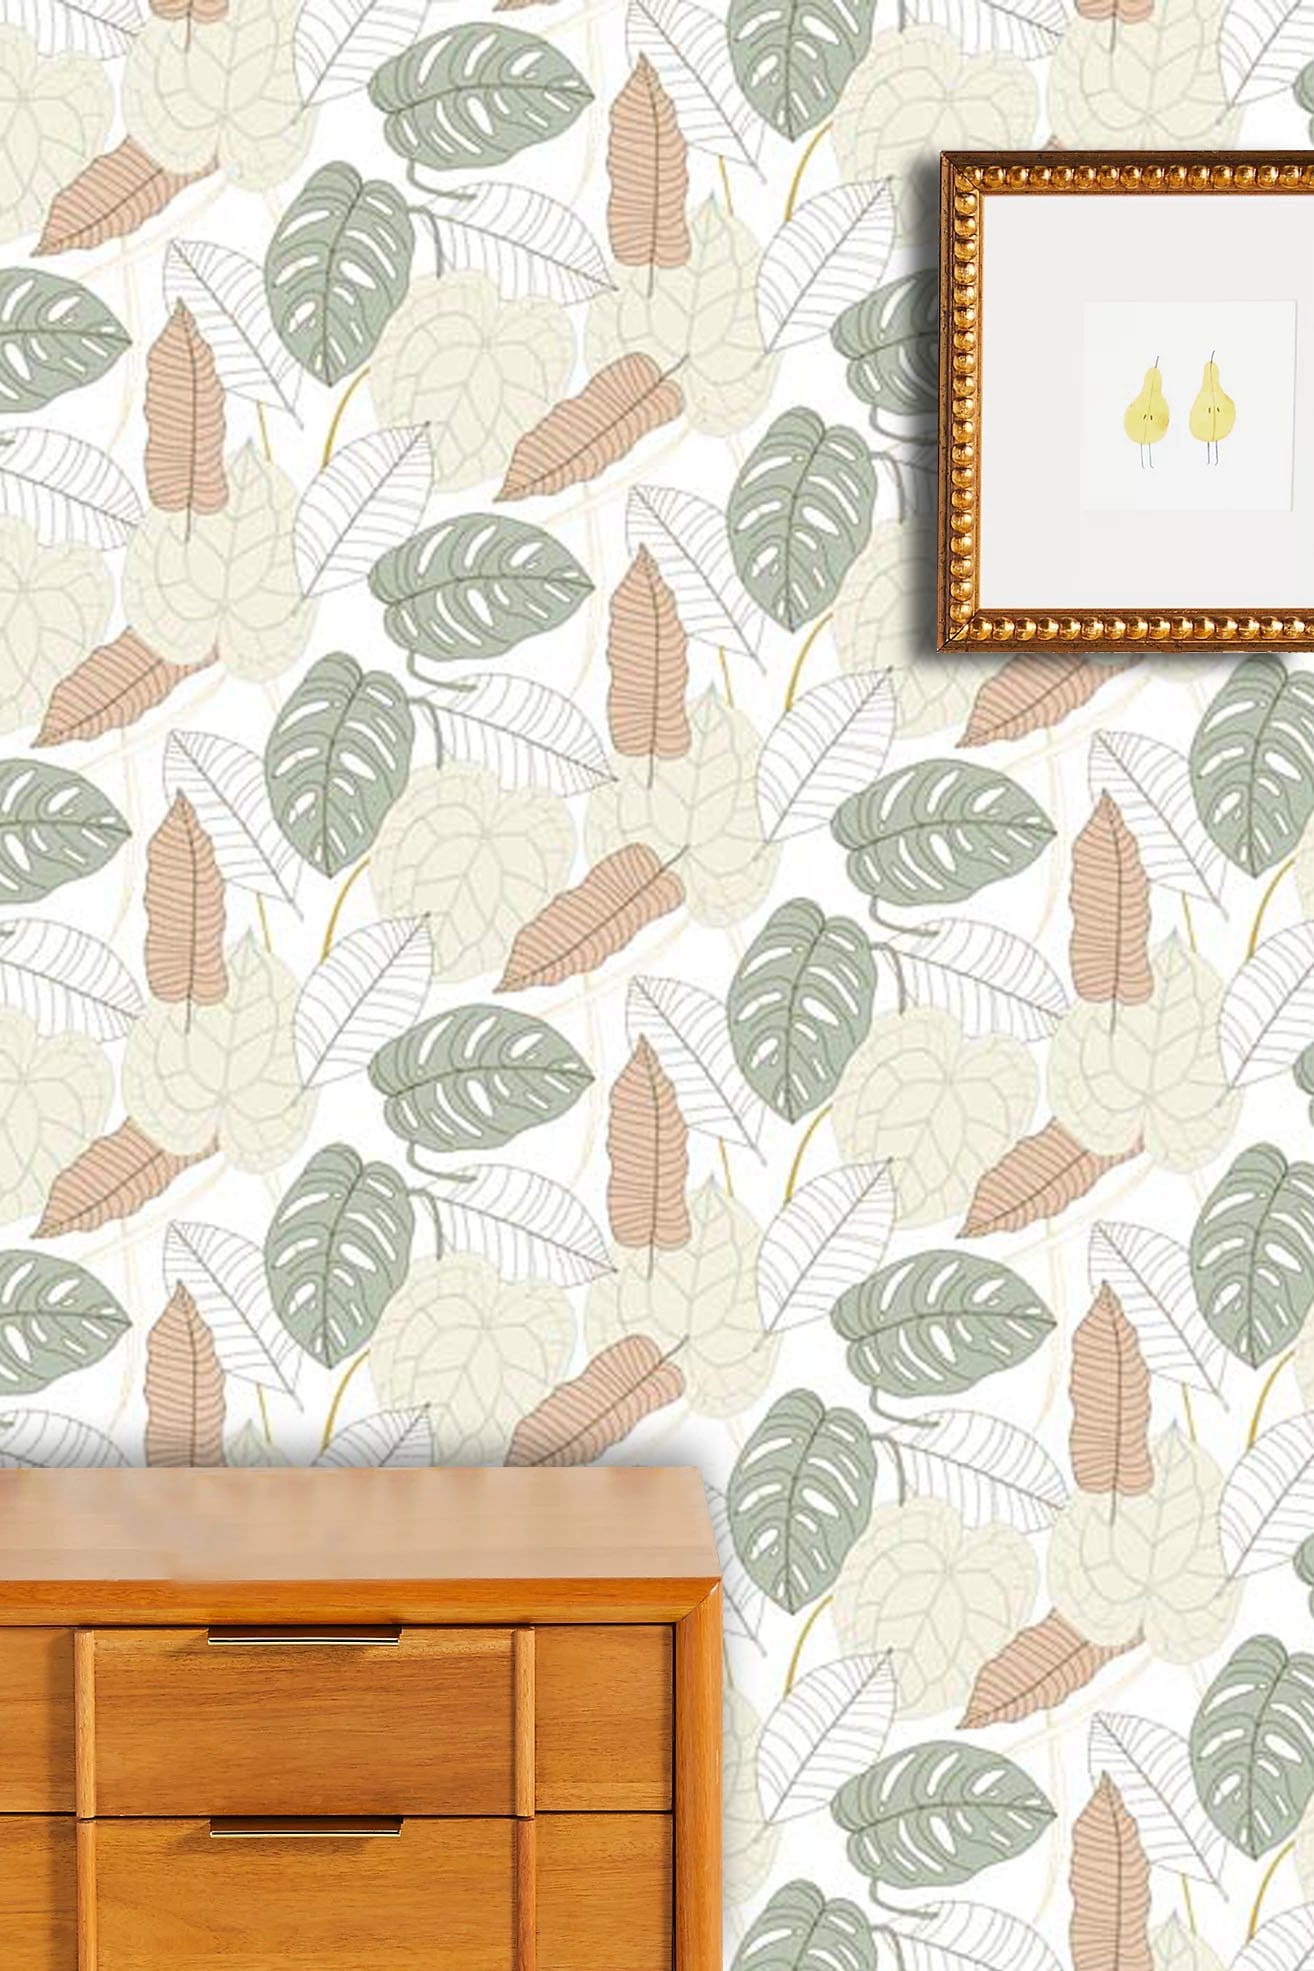 For living room decor, choose this leafy combination wallpaper mural.